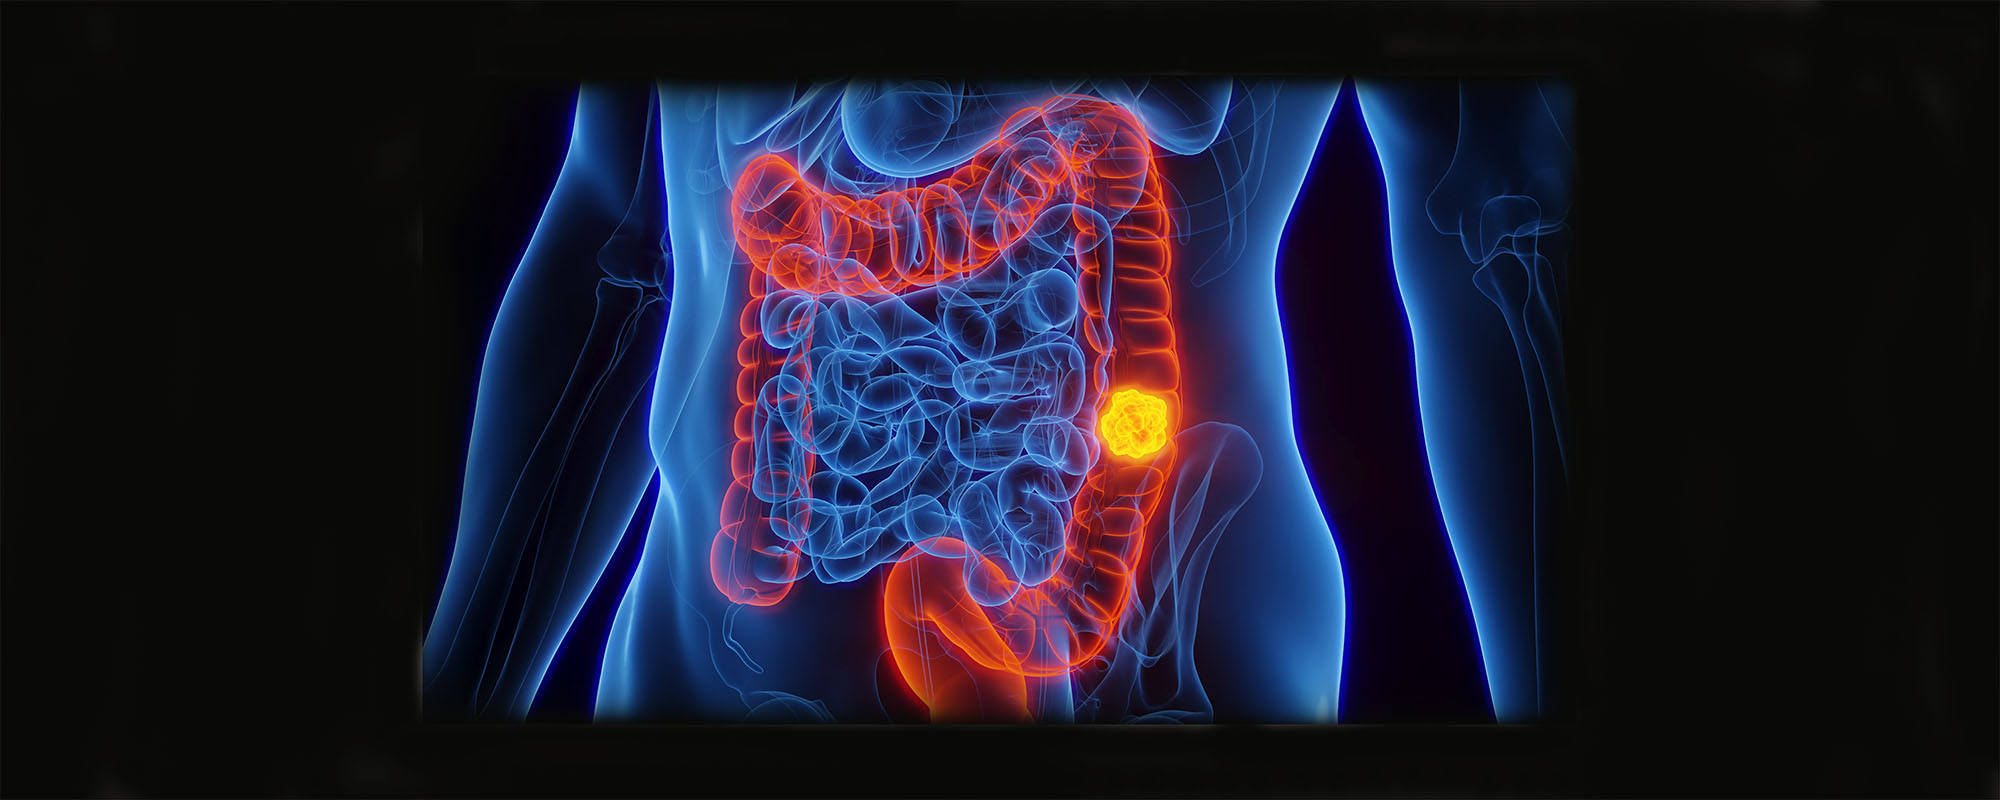 Medical illustration of cancer in the colon